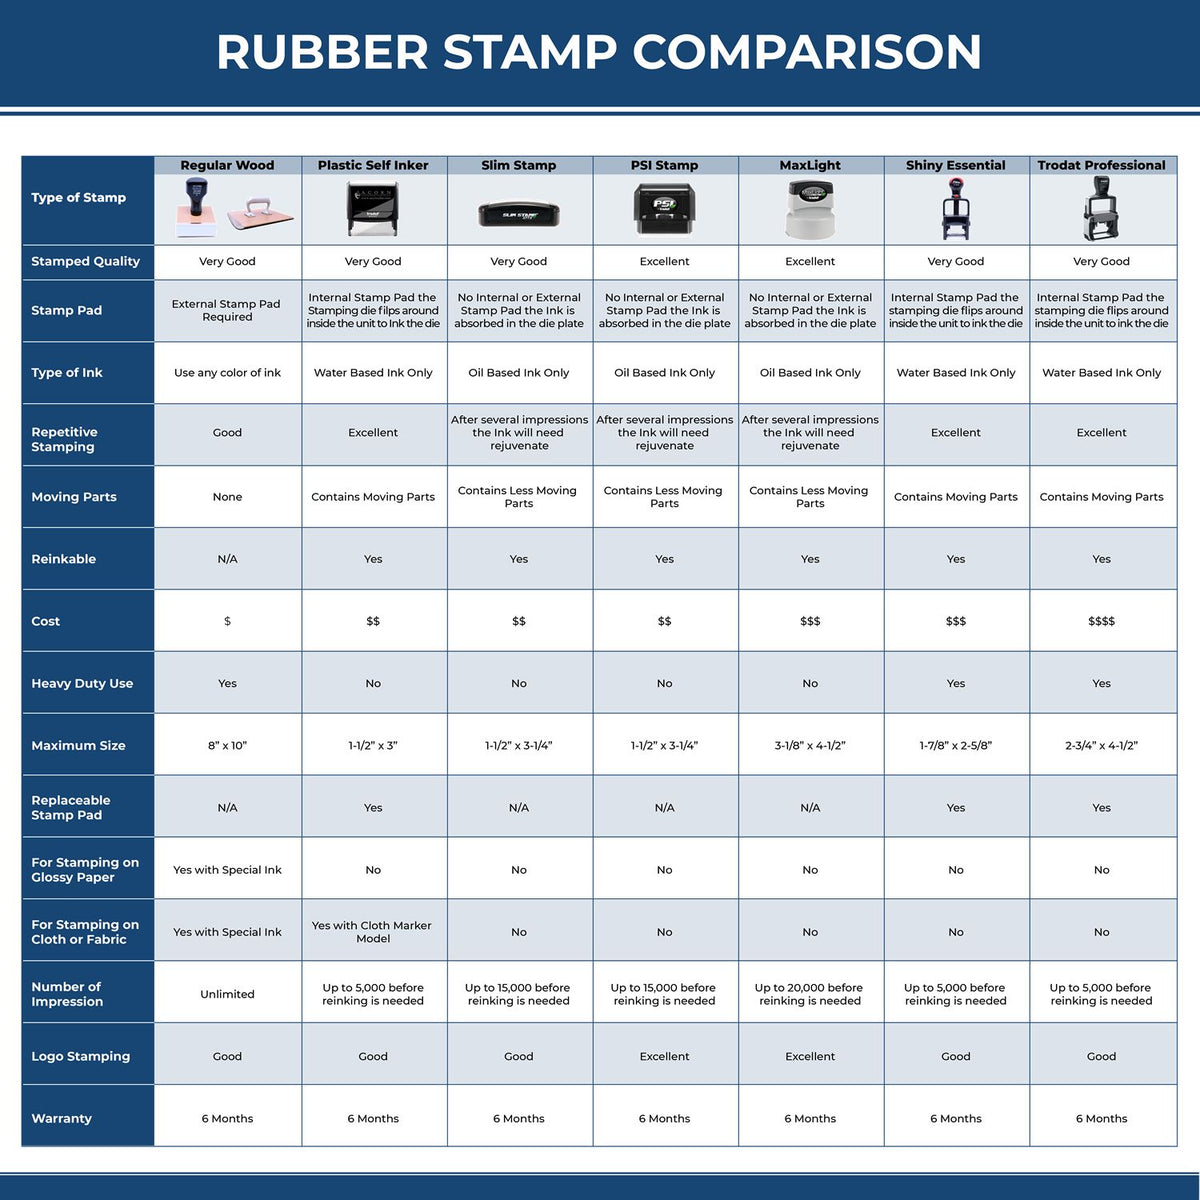 A comparison chart for the different types of mount models available for the Massachusetts Landscape Architectural Seal Stamp.